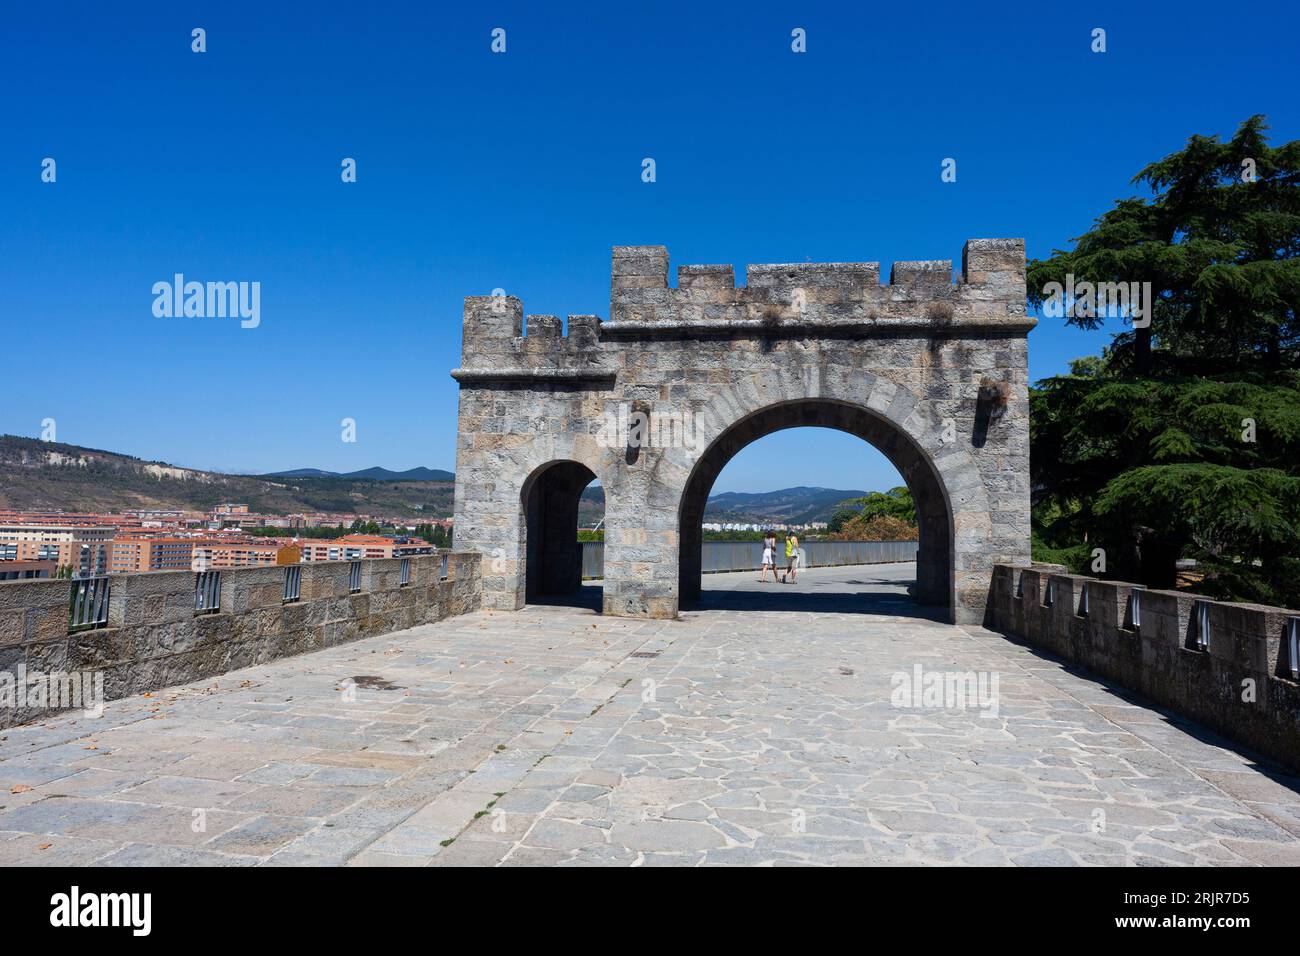 View of the City wall gate and path in Pamplona, Spain Stock Photo